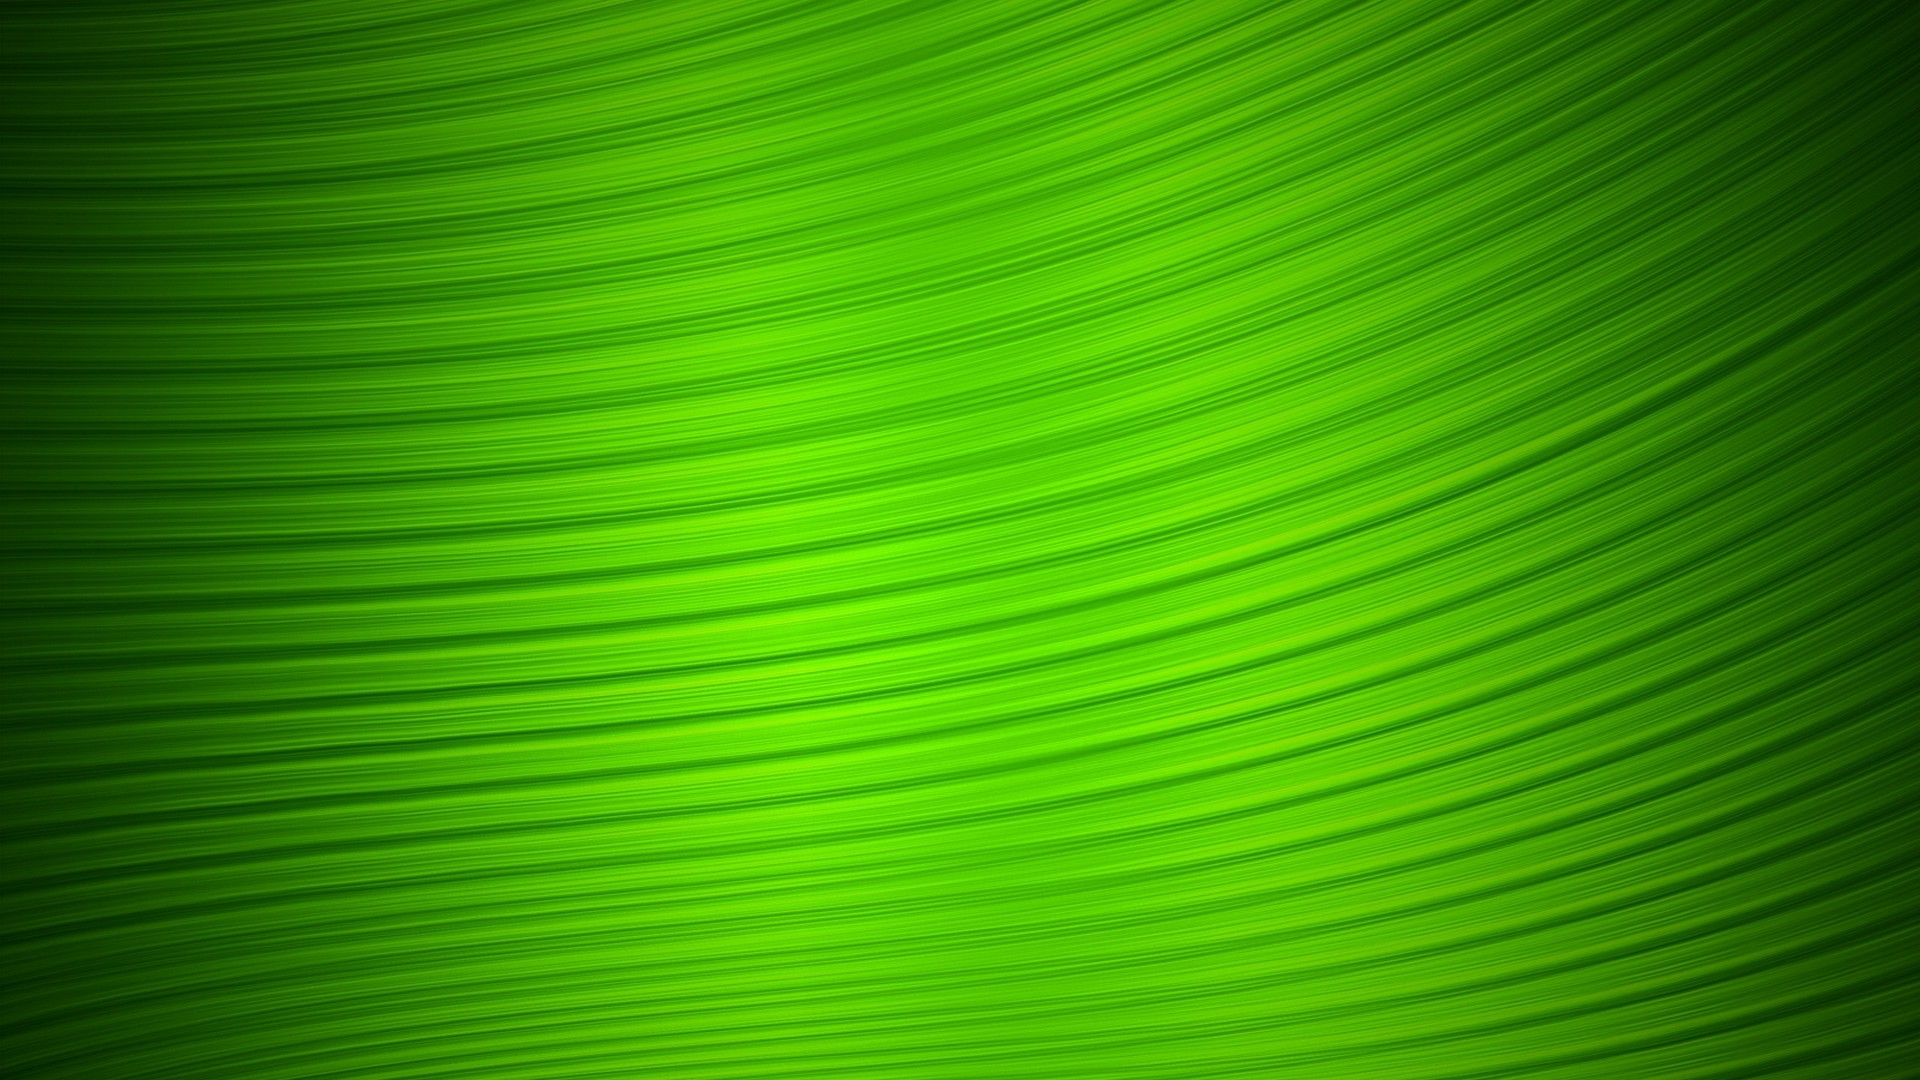 Desktop Wallpaper Green Colour with image resolution 1920x1080 pixel. You can use this wallpaper as background for your desktop Computer Screensavers, Android or iPhone smartphones